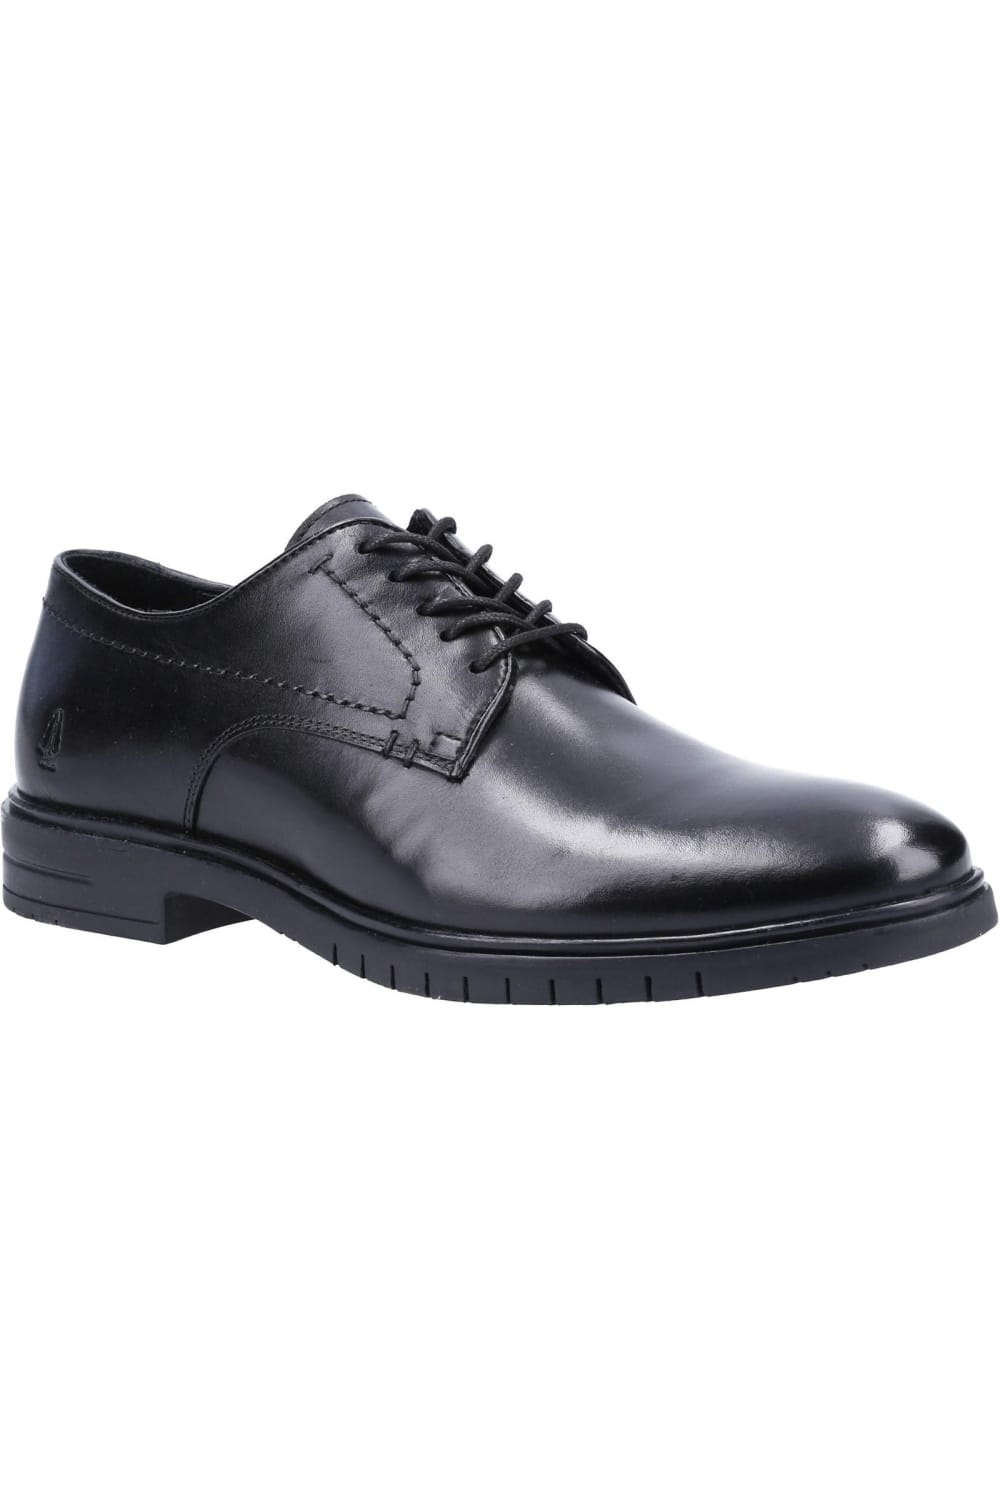 Mens Sterling Leather Shoes - Black